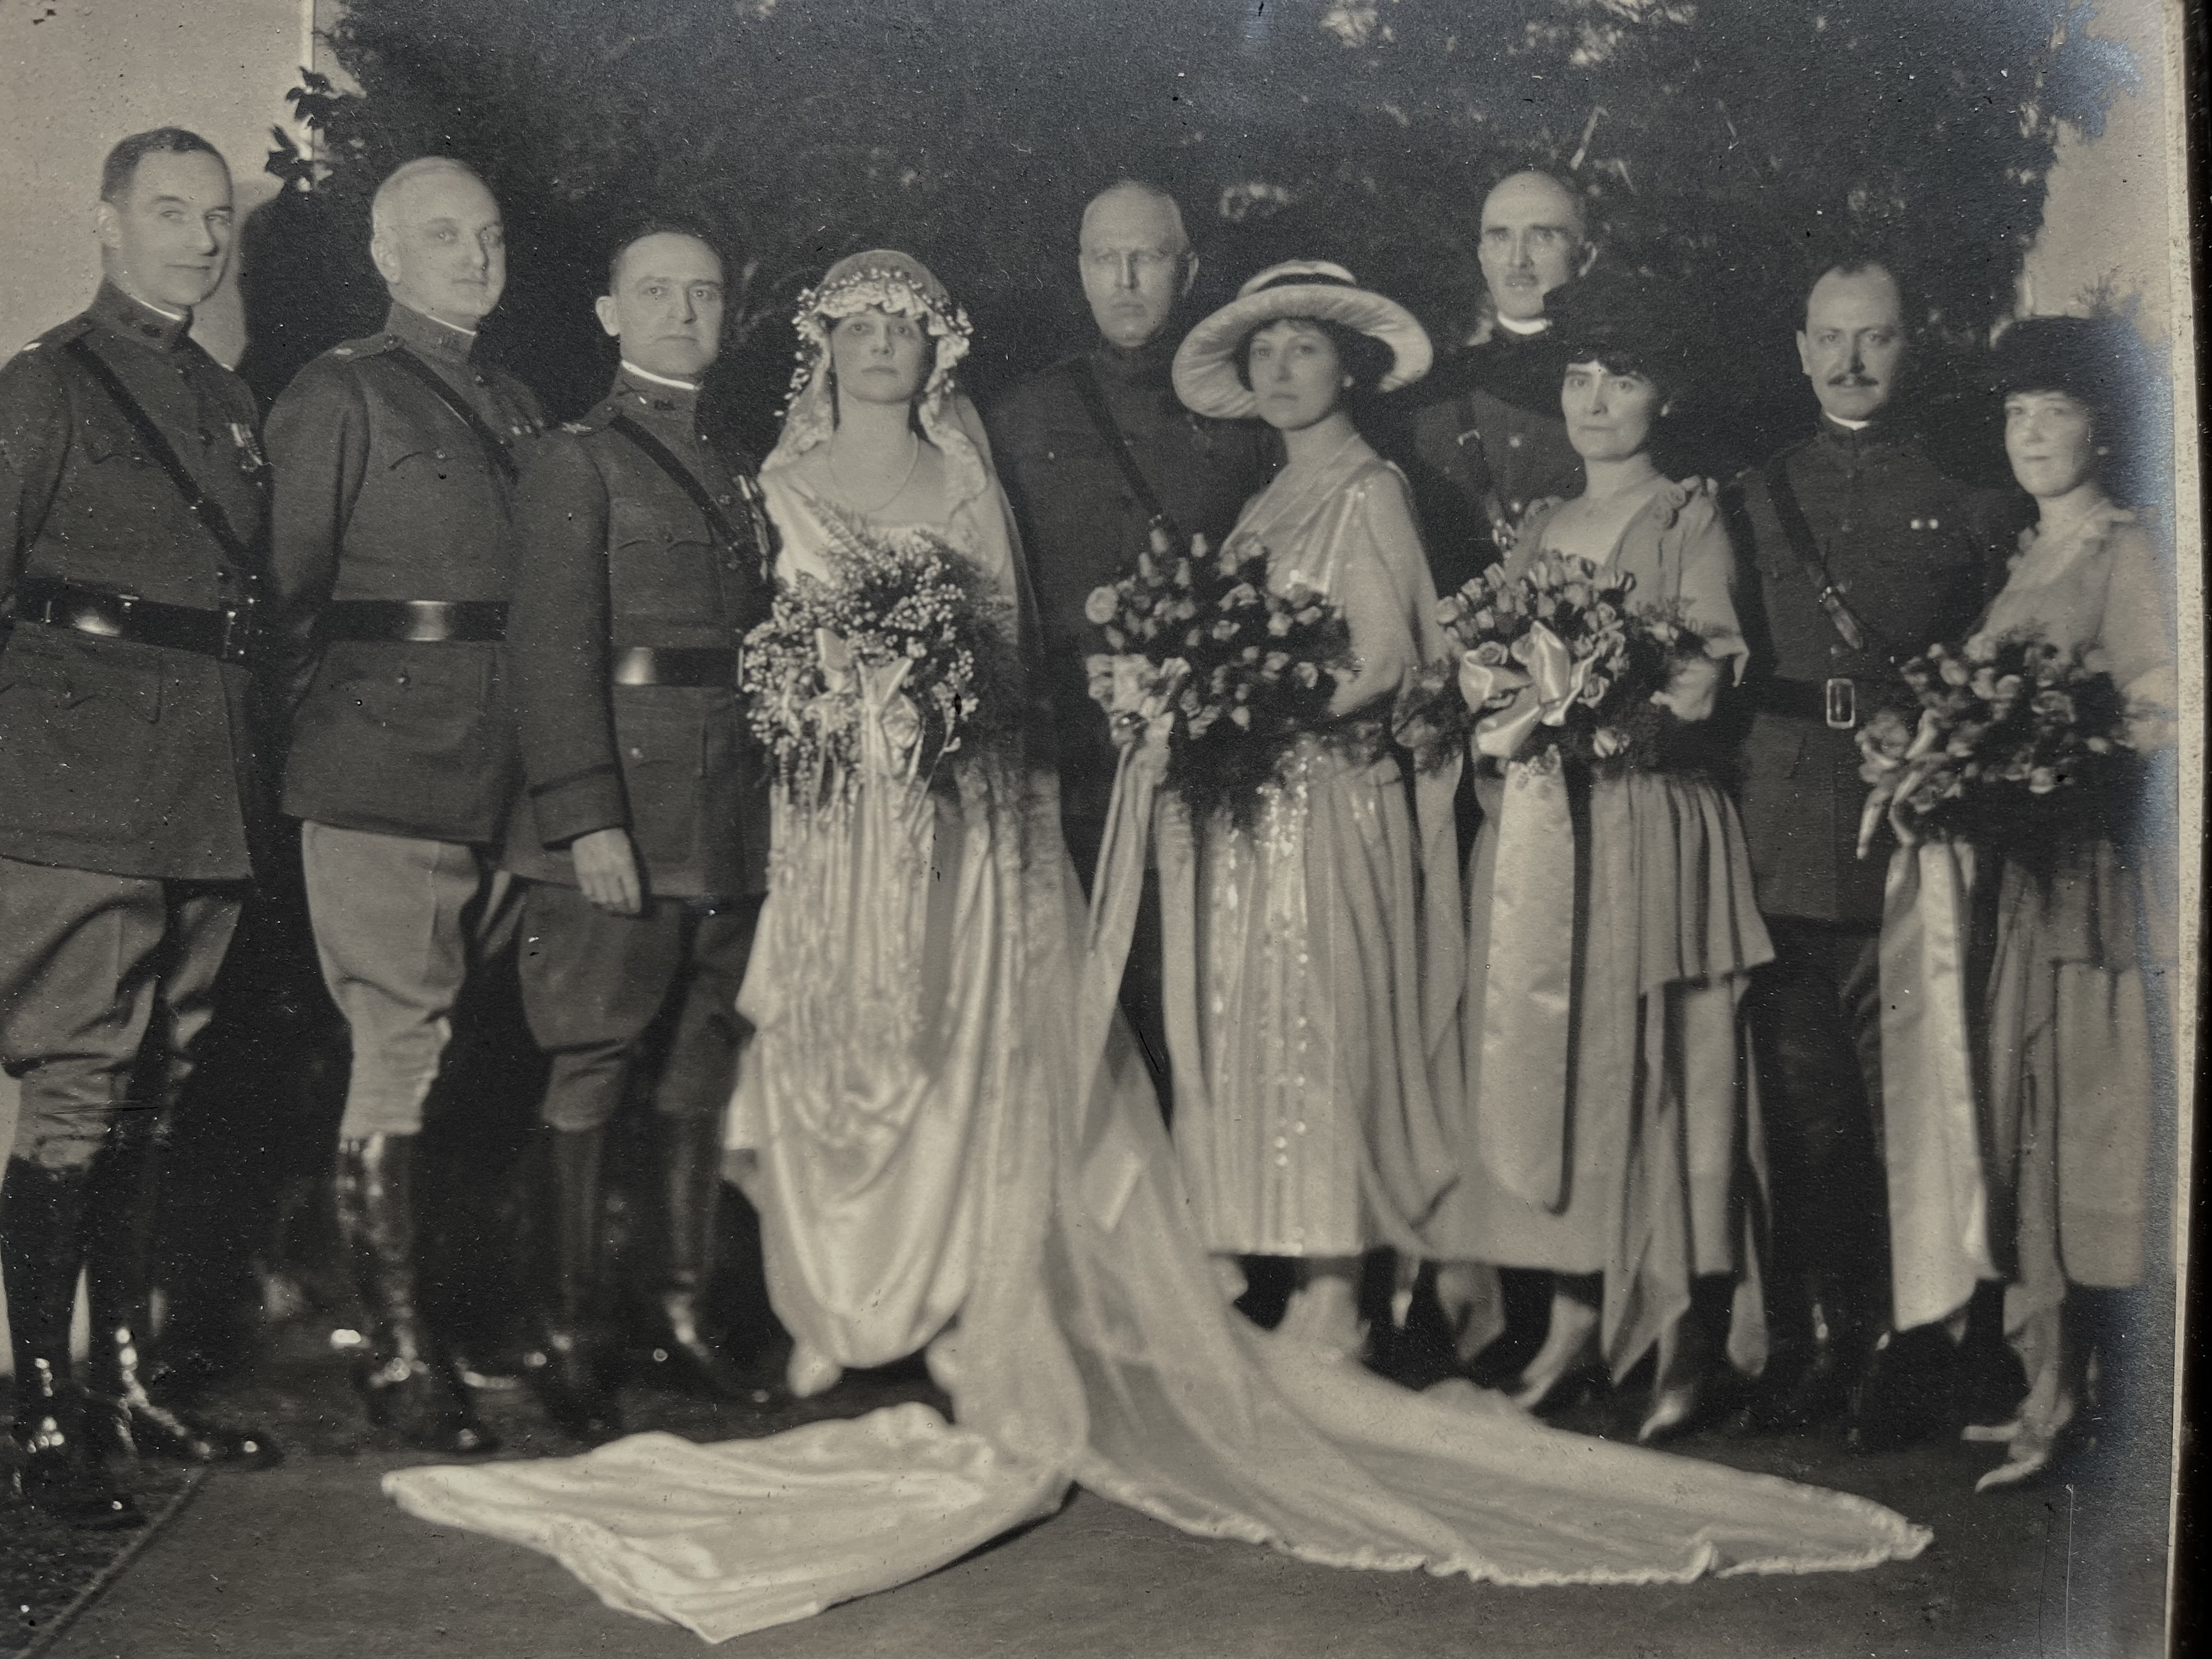 1921 photo of Perry wedding party, with male members in uniforms and females holding flowers against floral backdrop.